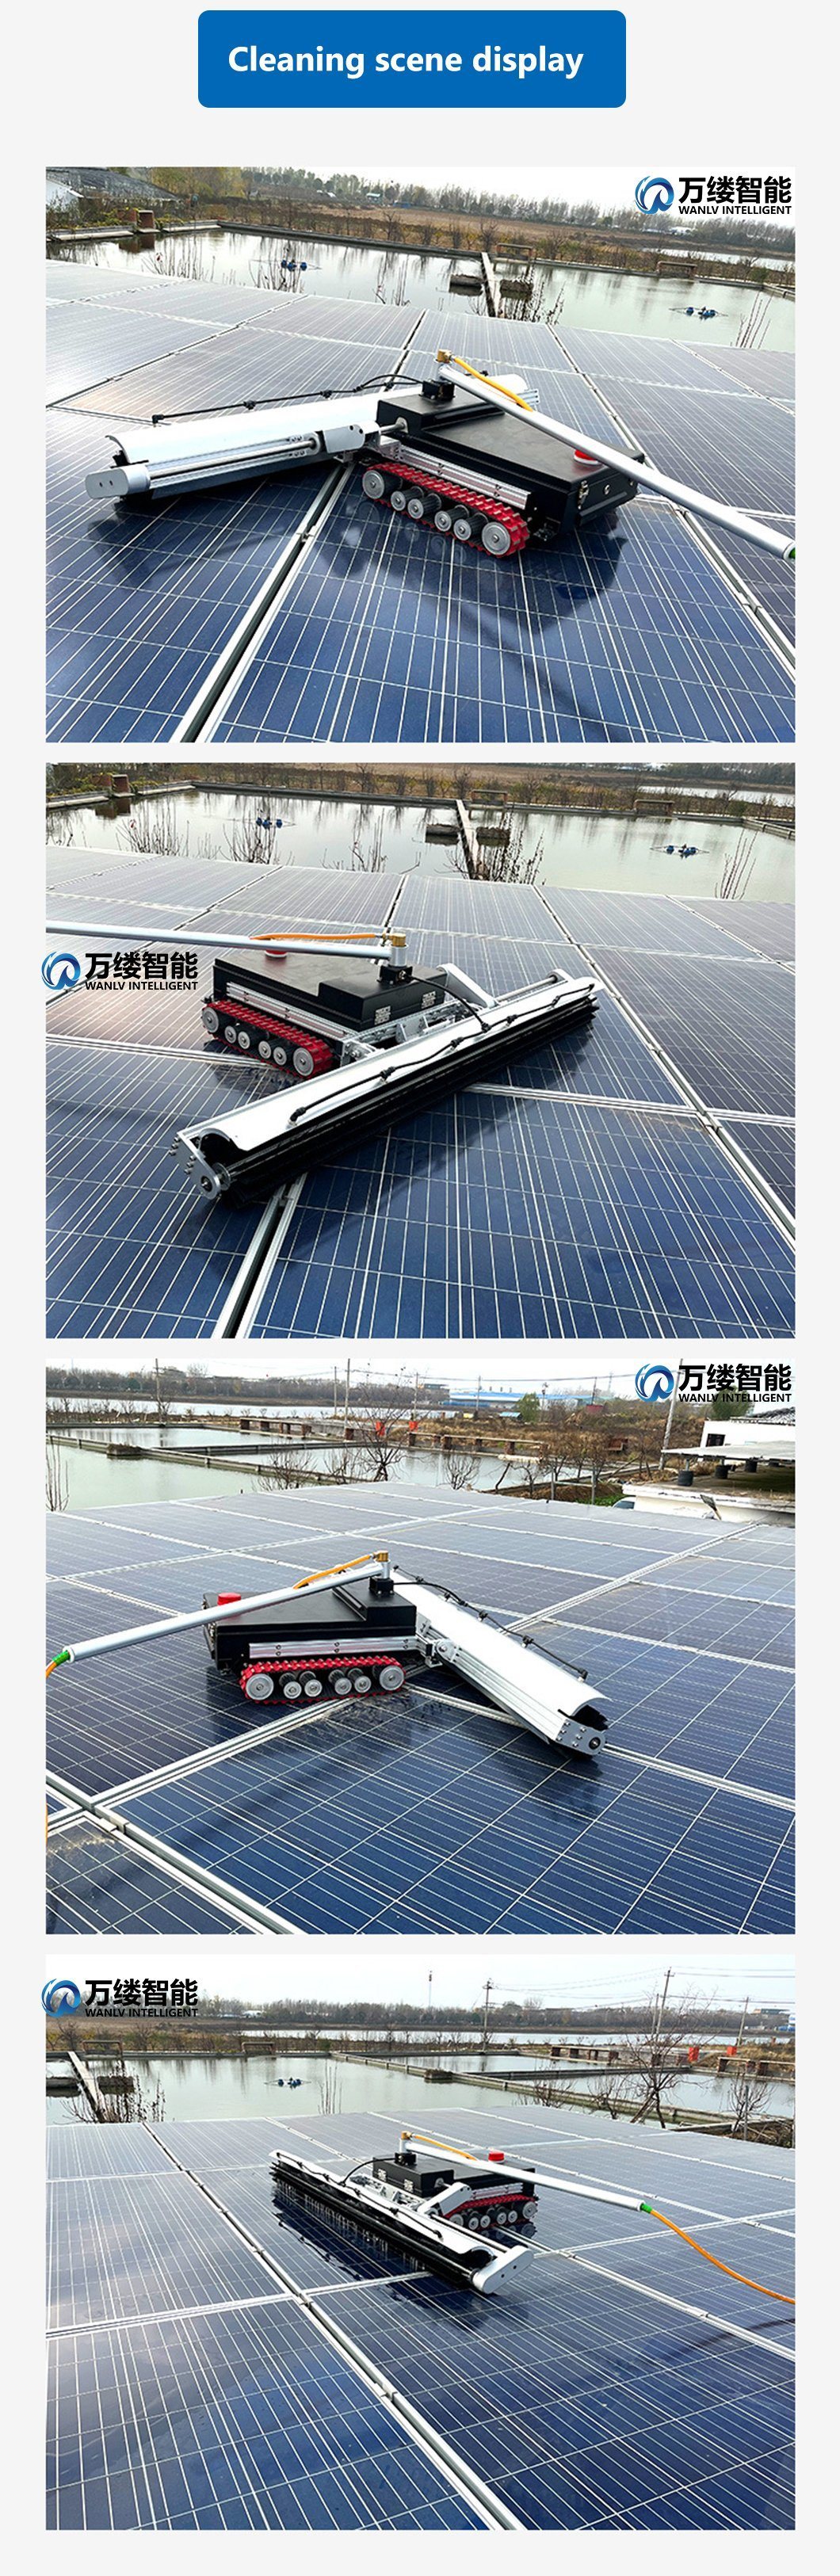 Window and Solar Panel Cleaning System Cleaning Equipment Solar Panel Cleaning Robot